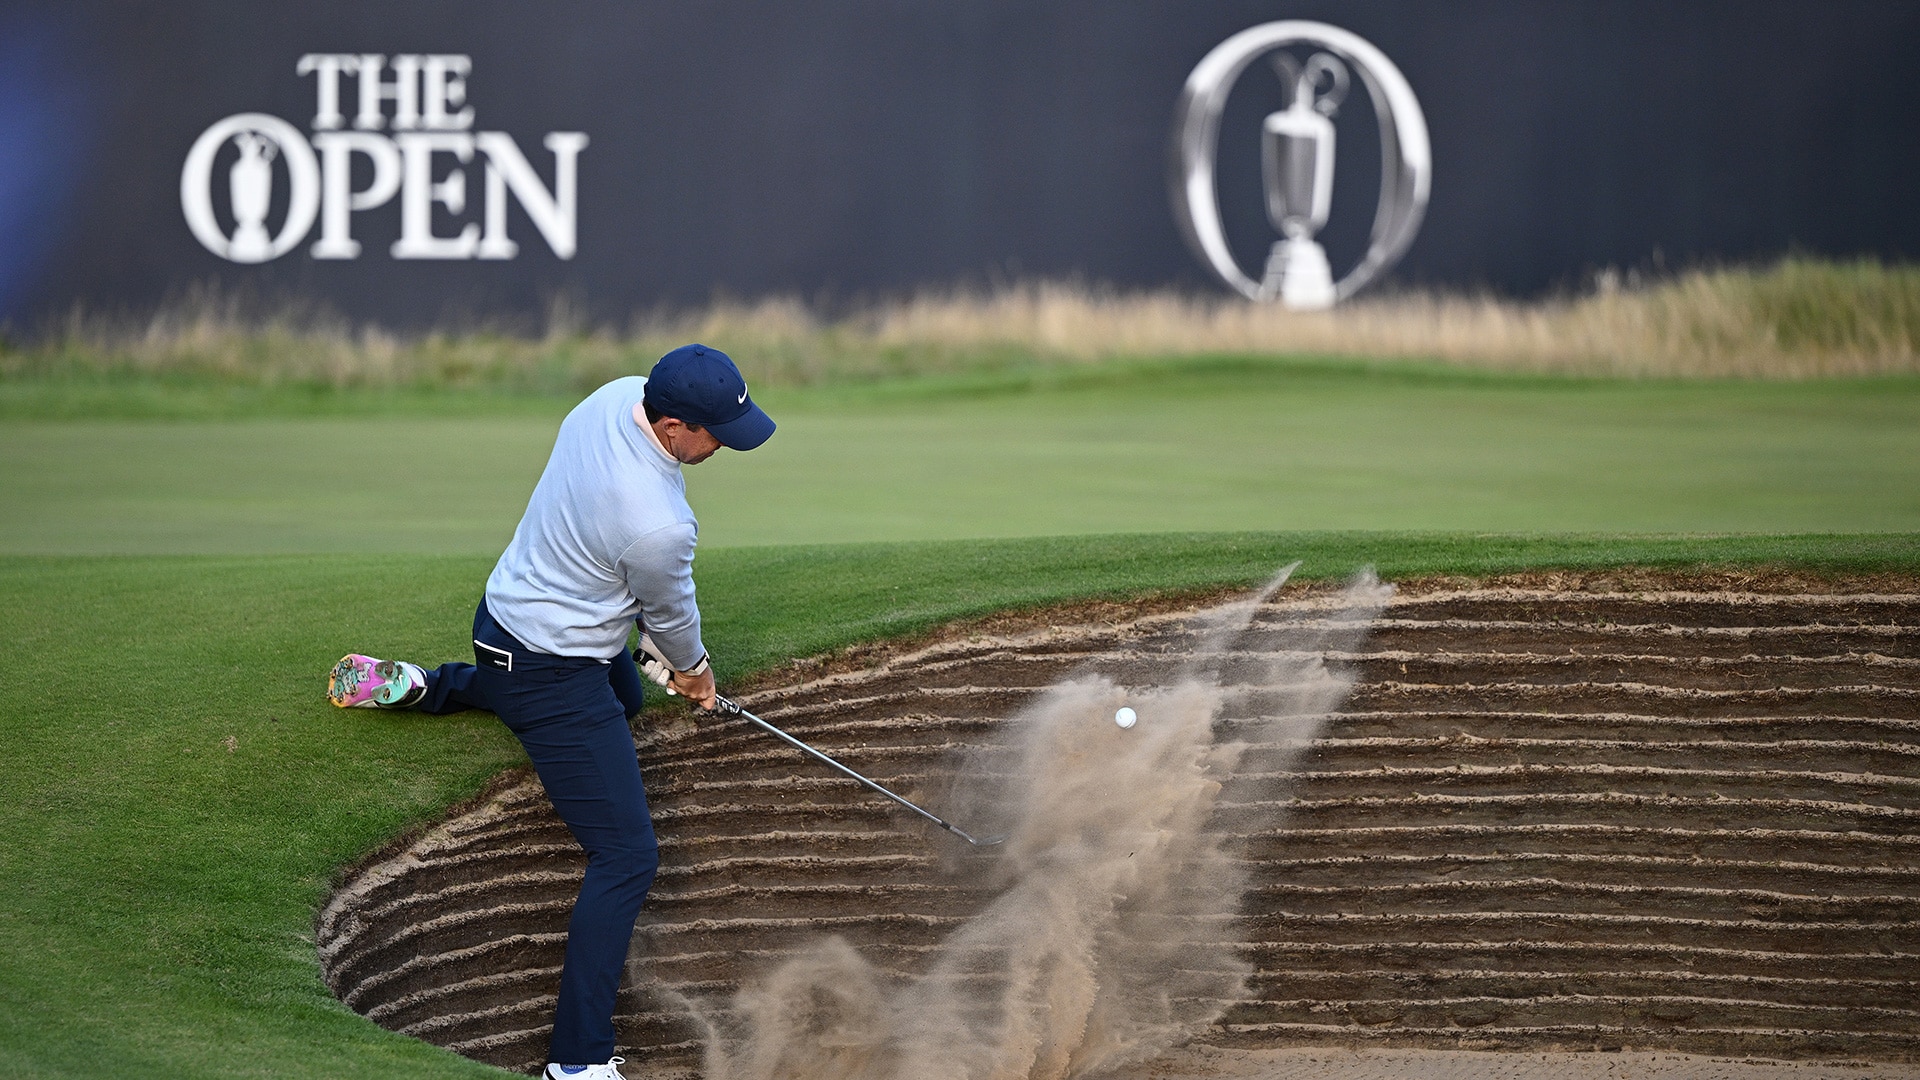 Rory McIlroy’s clutch up-and-down on final hole have saved his victory chances at the 2023 British Open